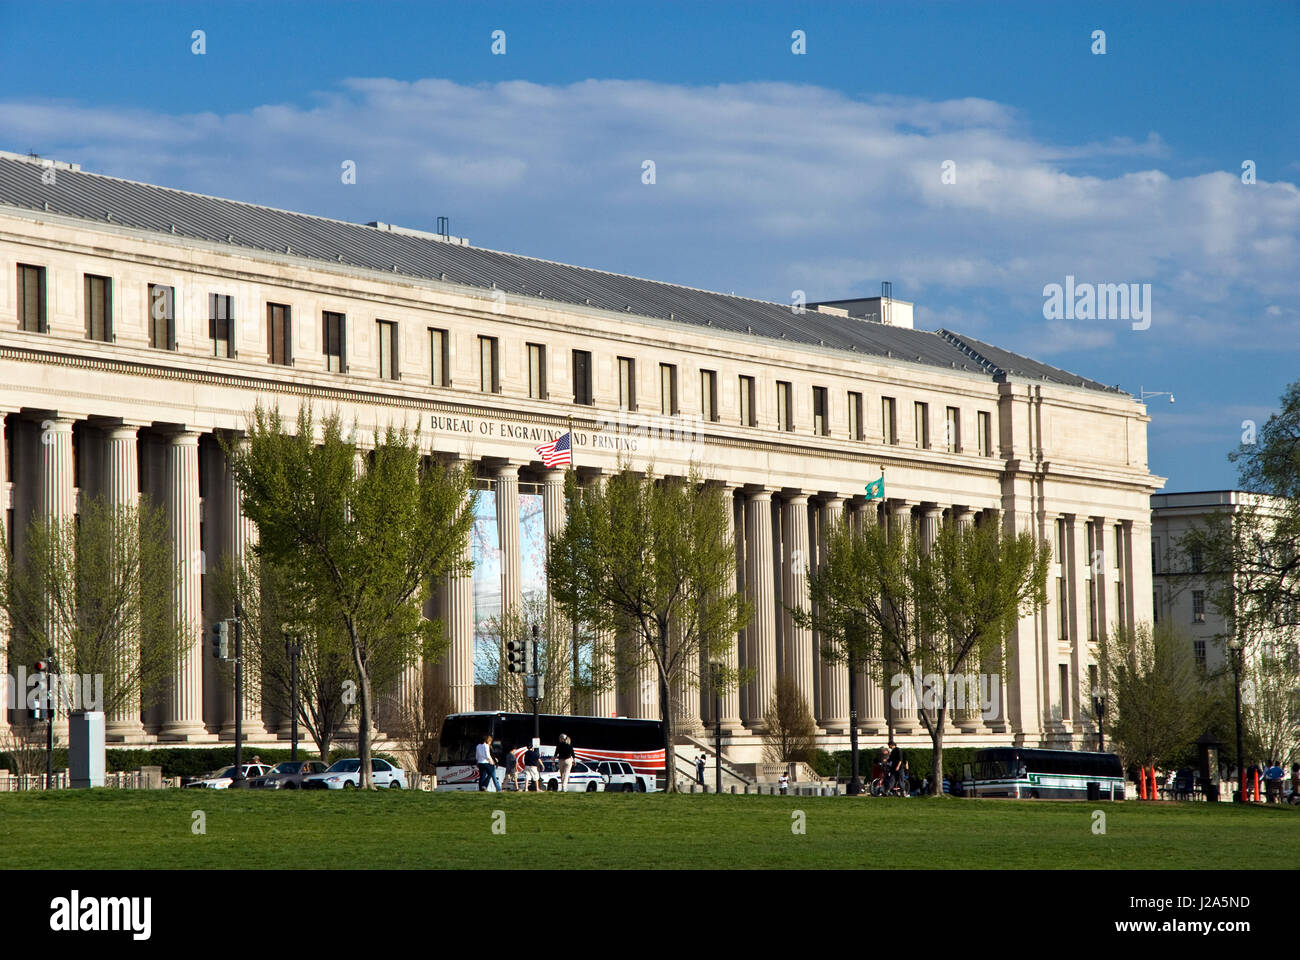 The Bureau of Engraving and Printing, where US currency is printed,  Washington, DC Stock Photo - Alamy